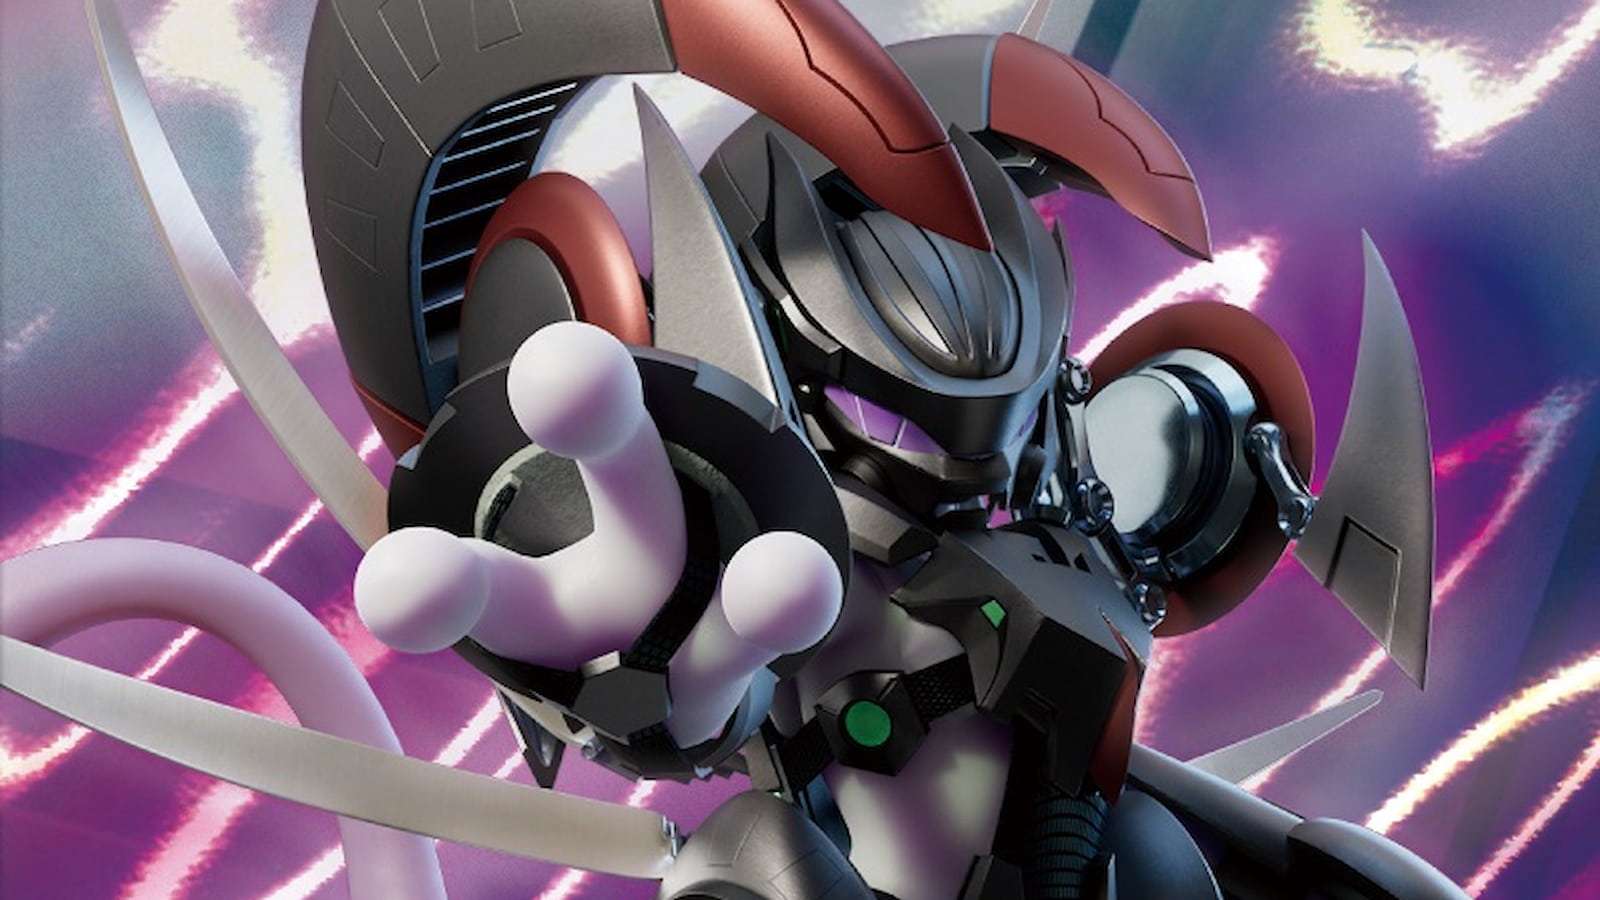 Armored Mewtwo's Pokemon Trading Card Game card